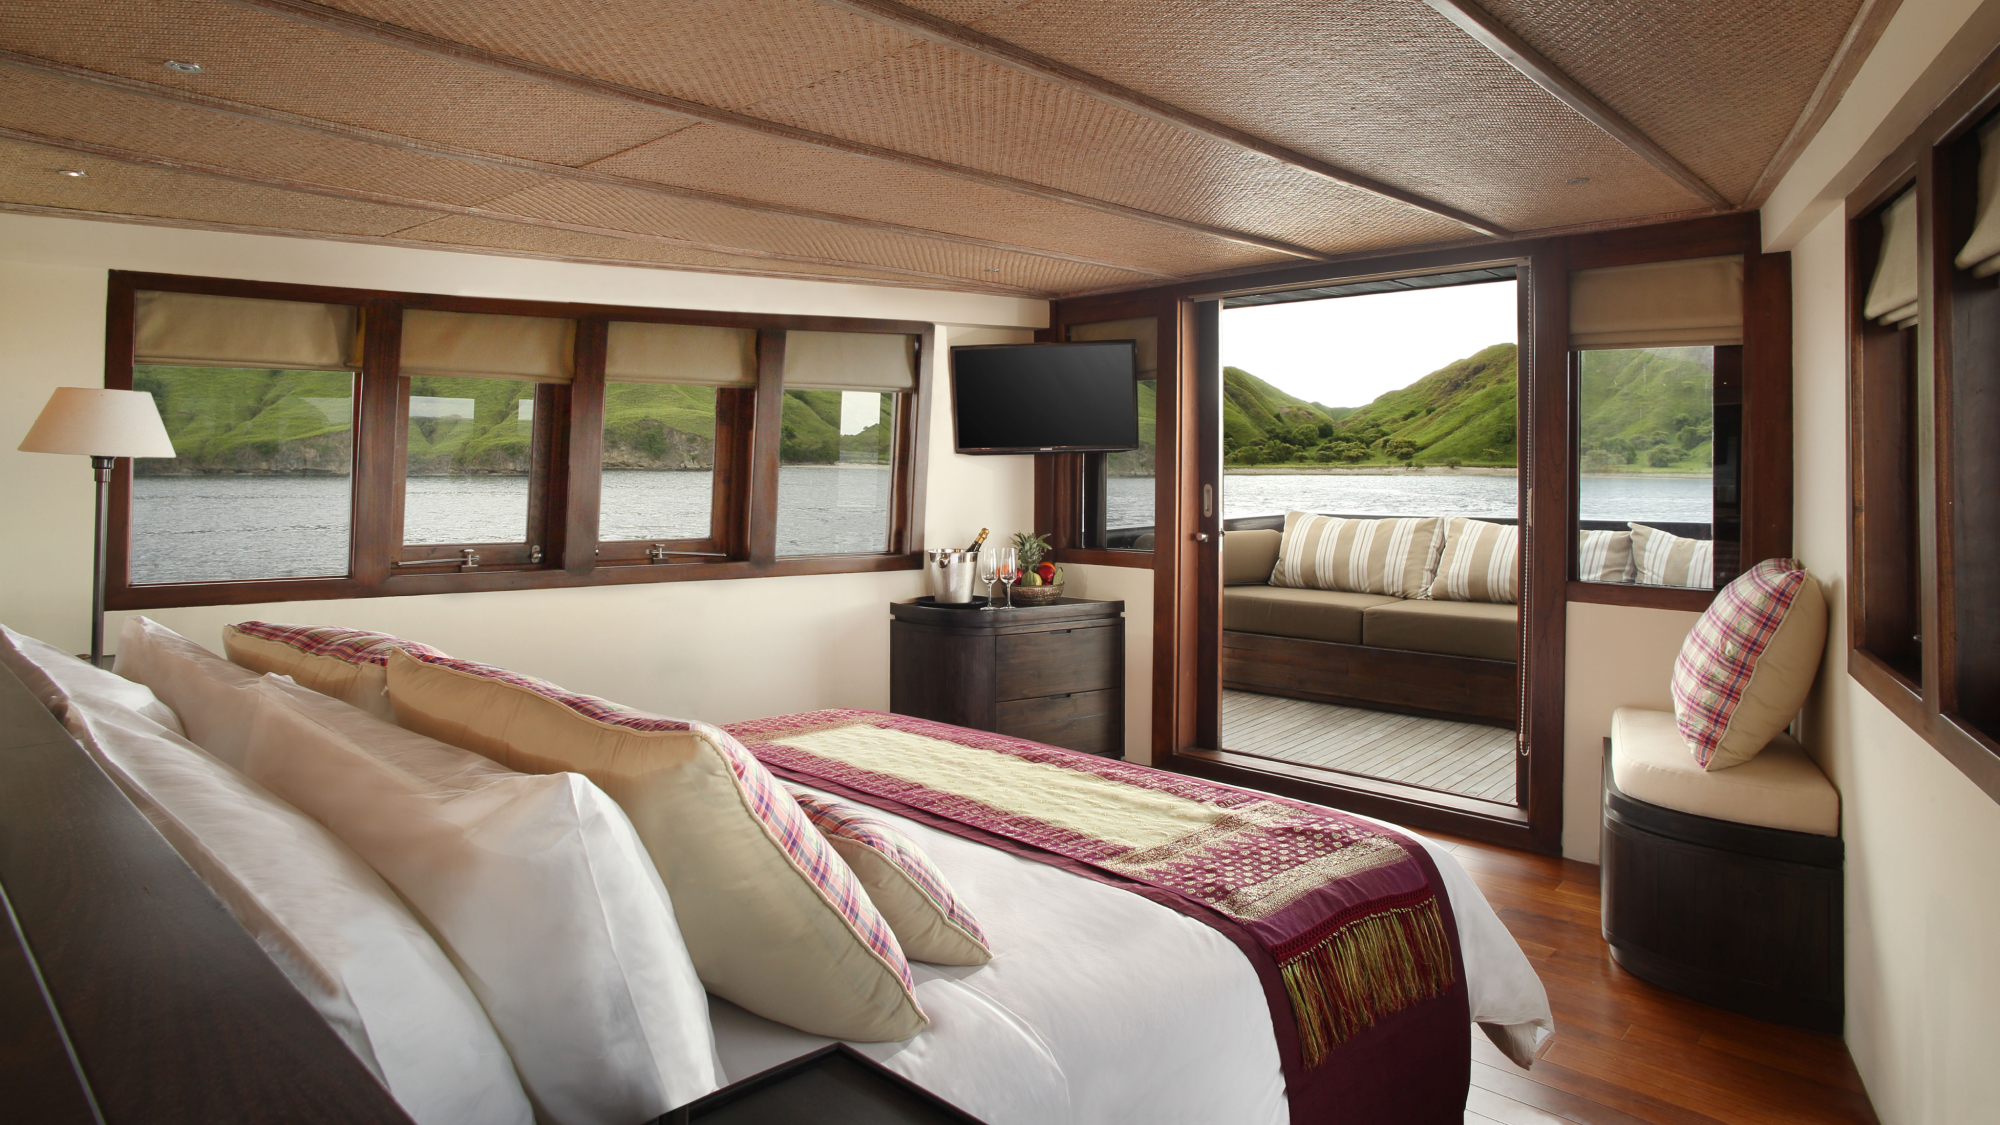 Master suite on boat.